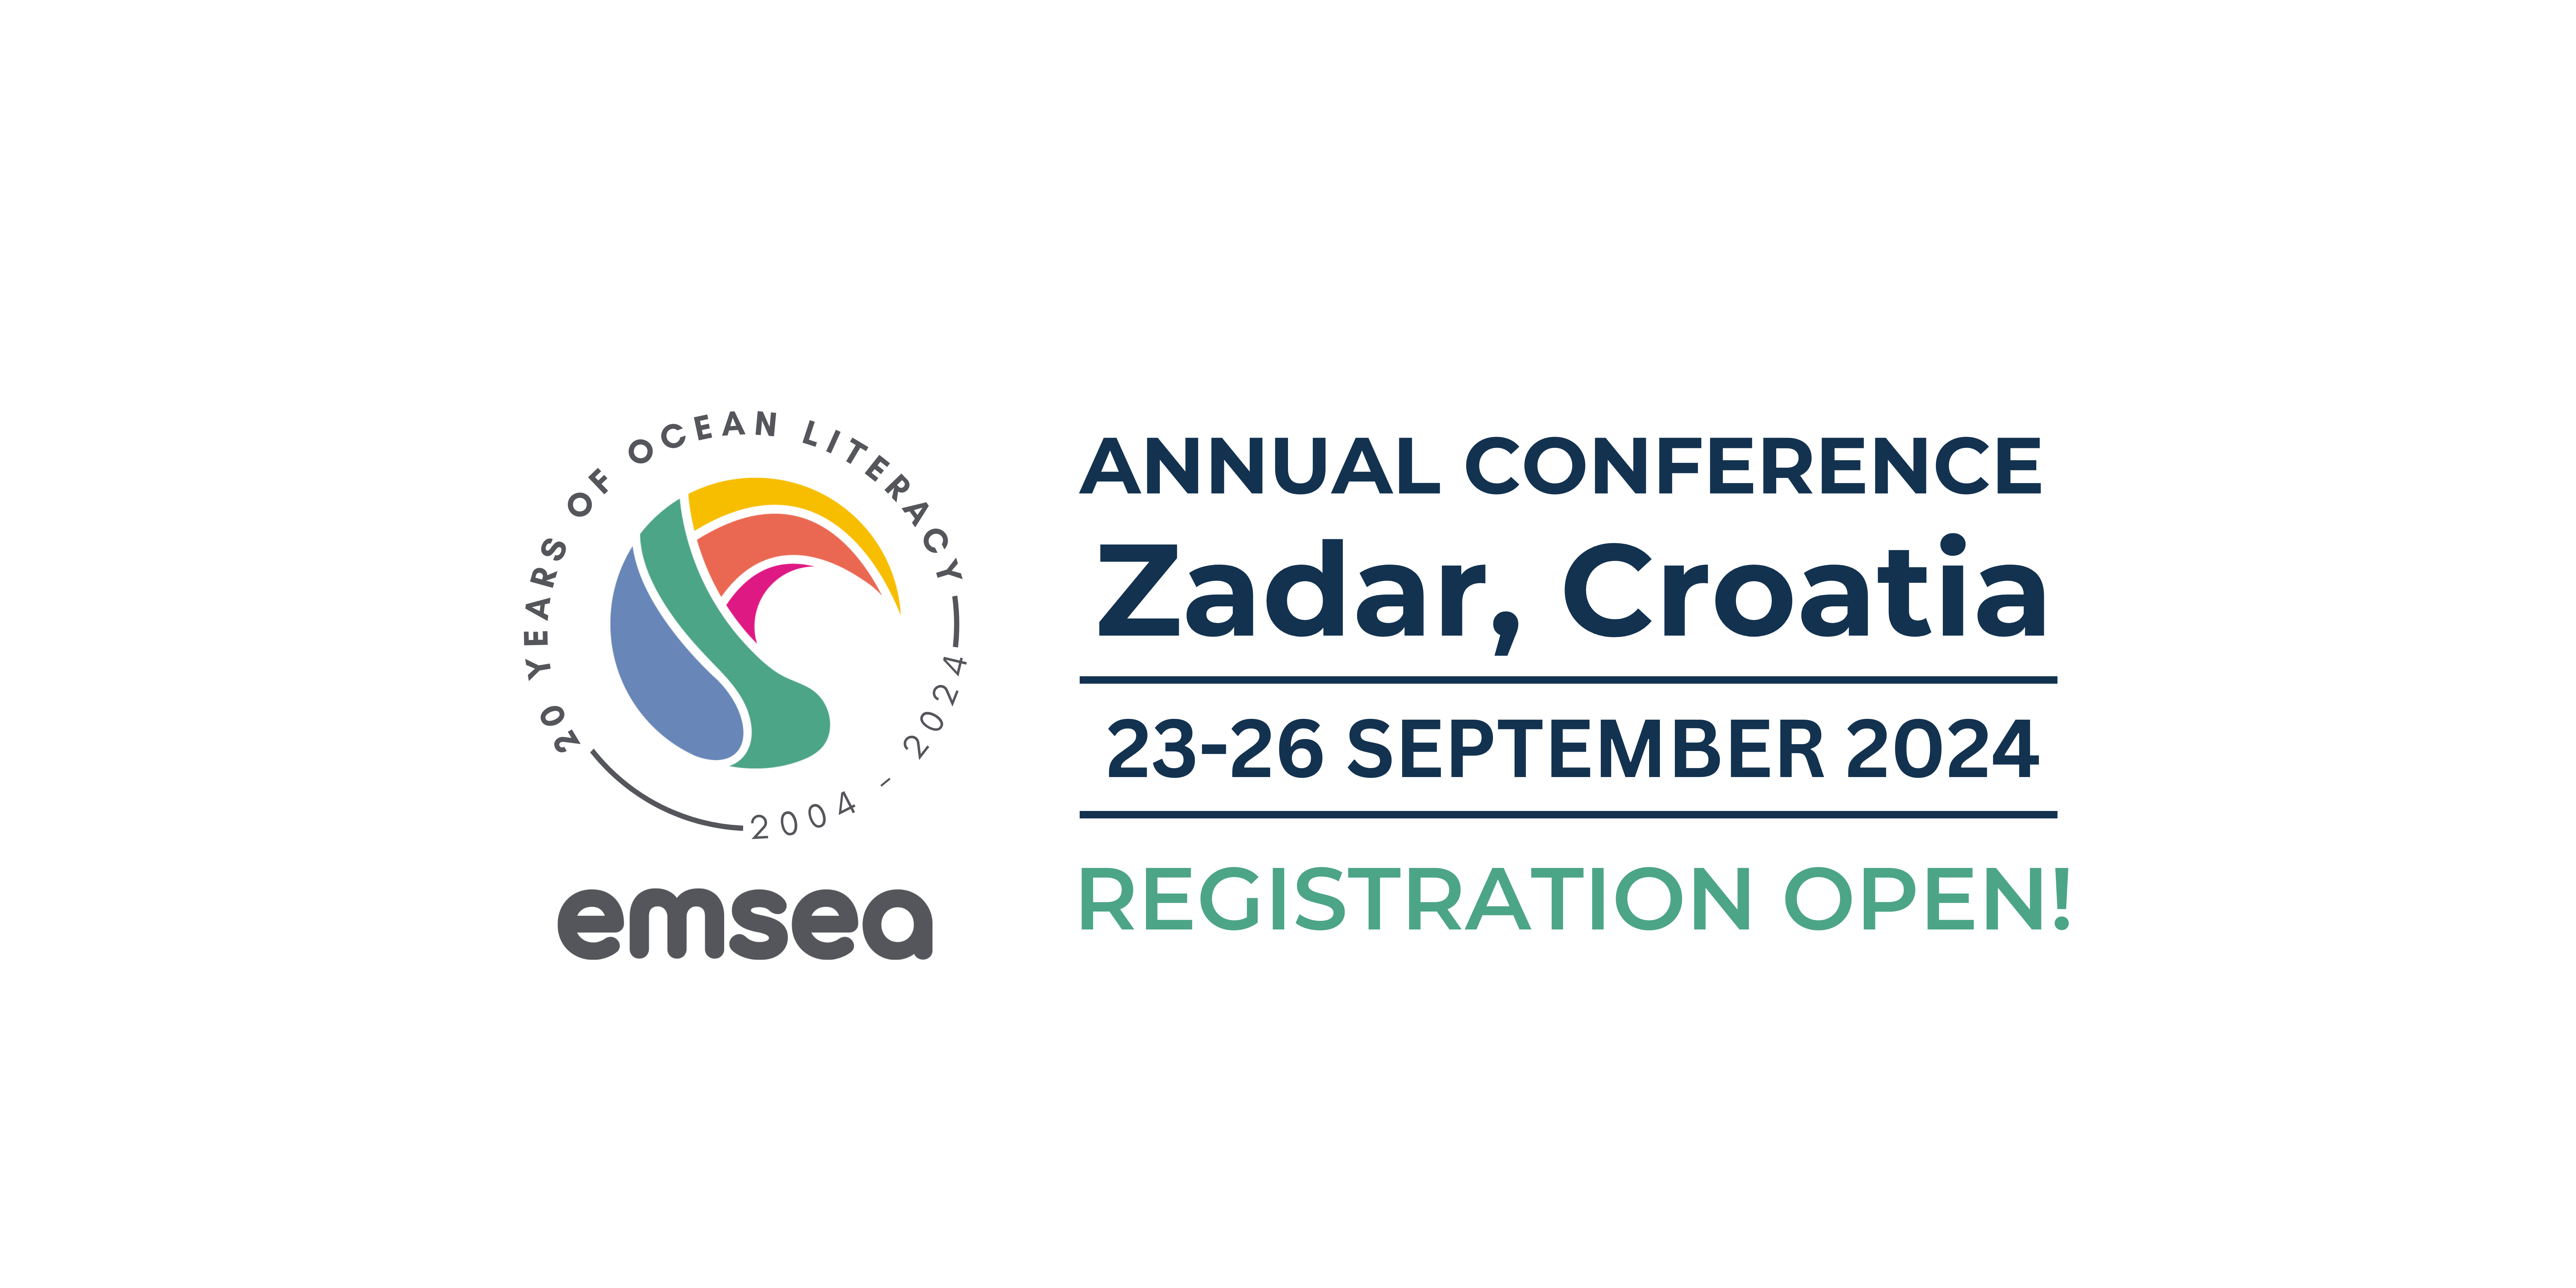 EMSEA logo with conference location (Zadar, Croatia) and dates (23-26 September 2024)